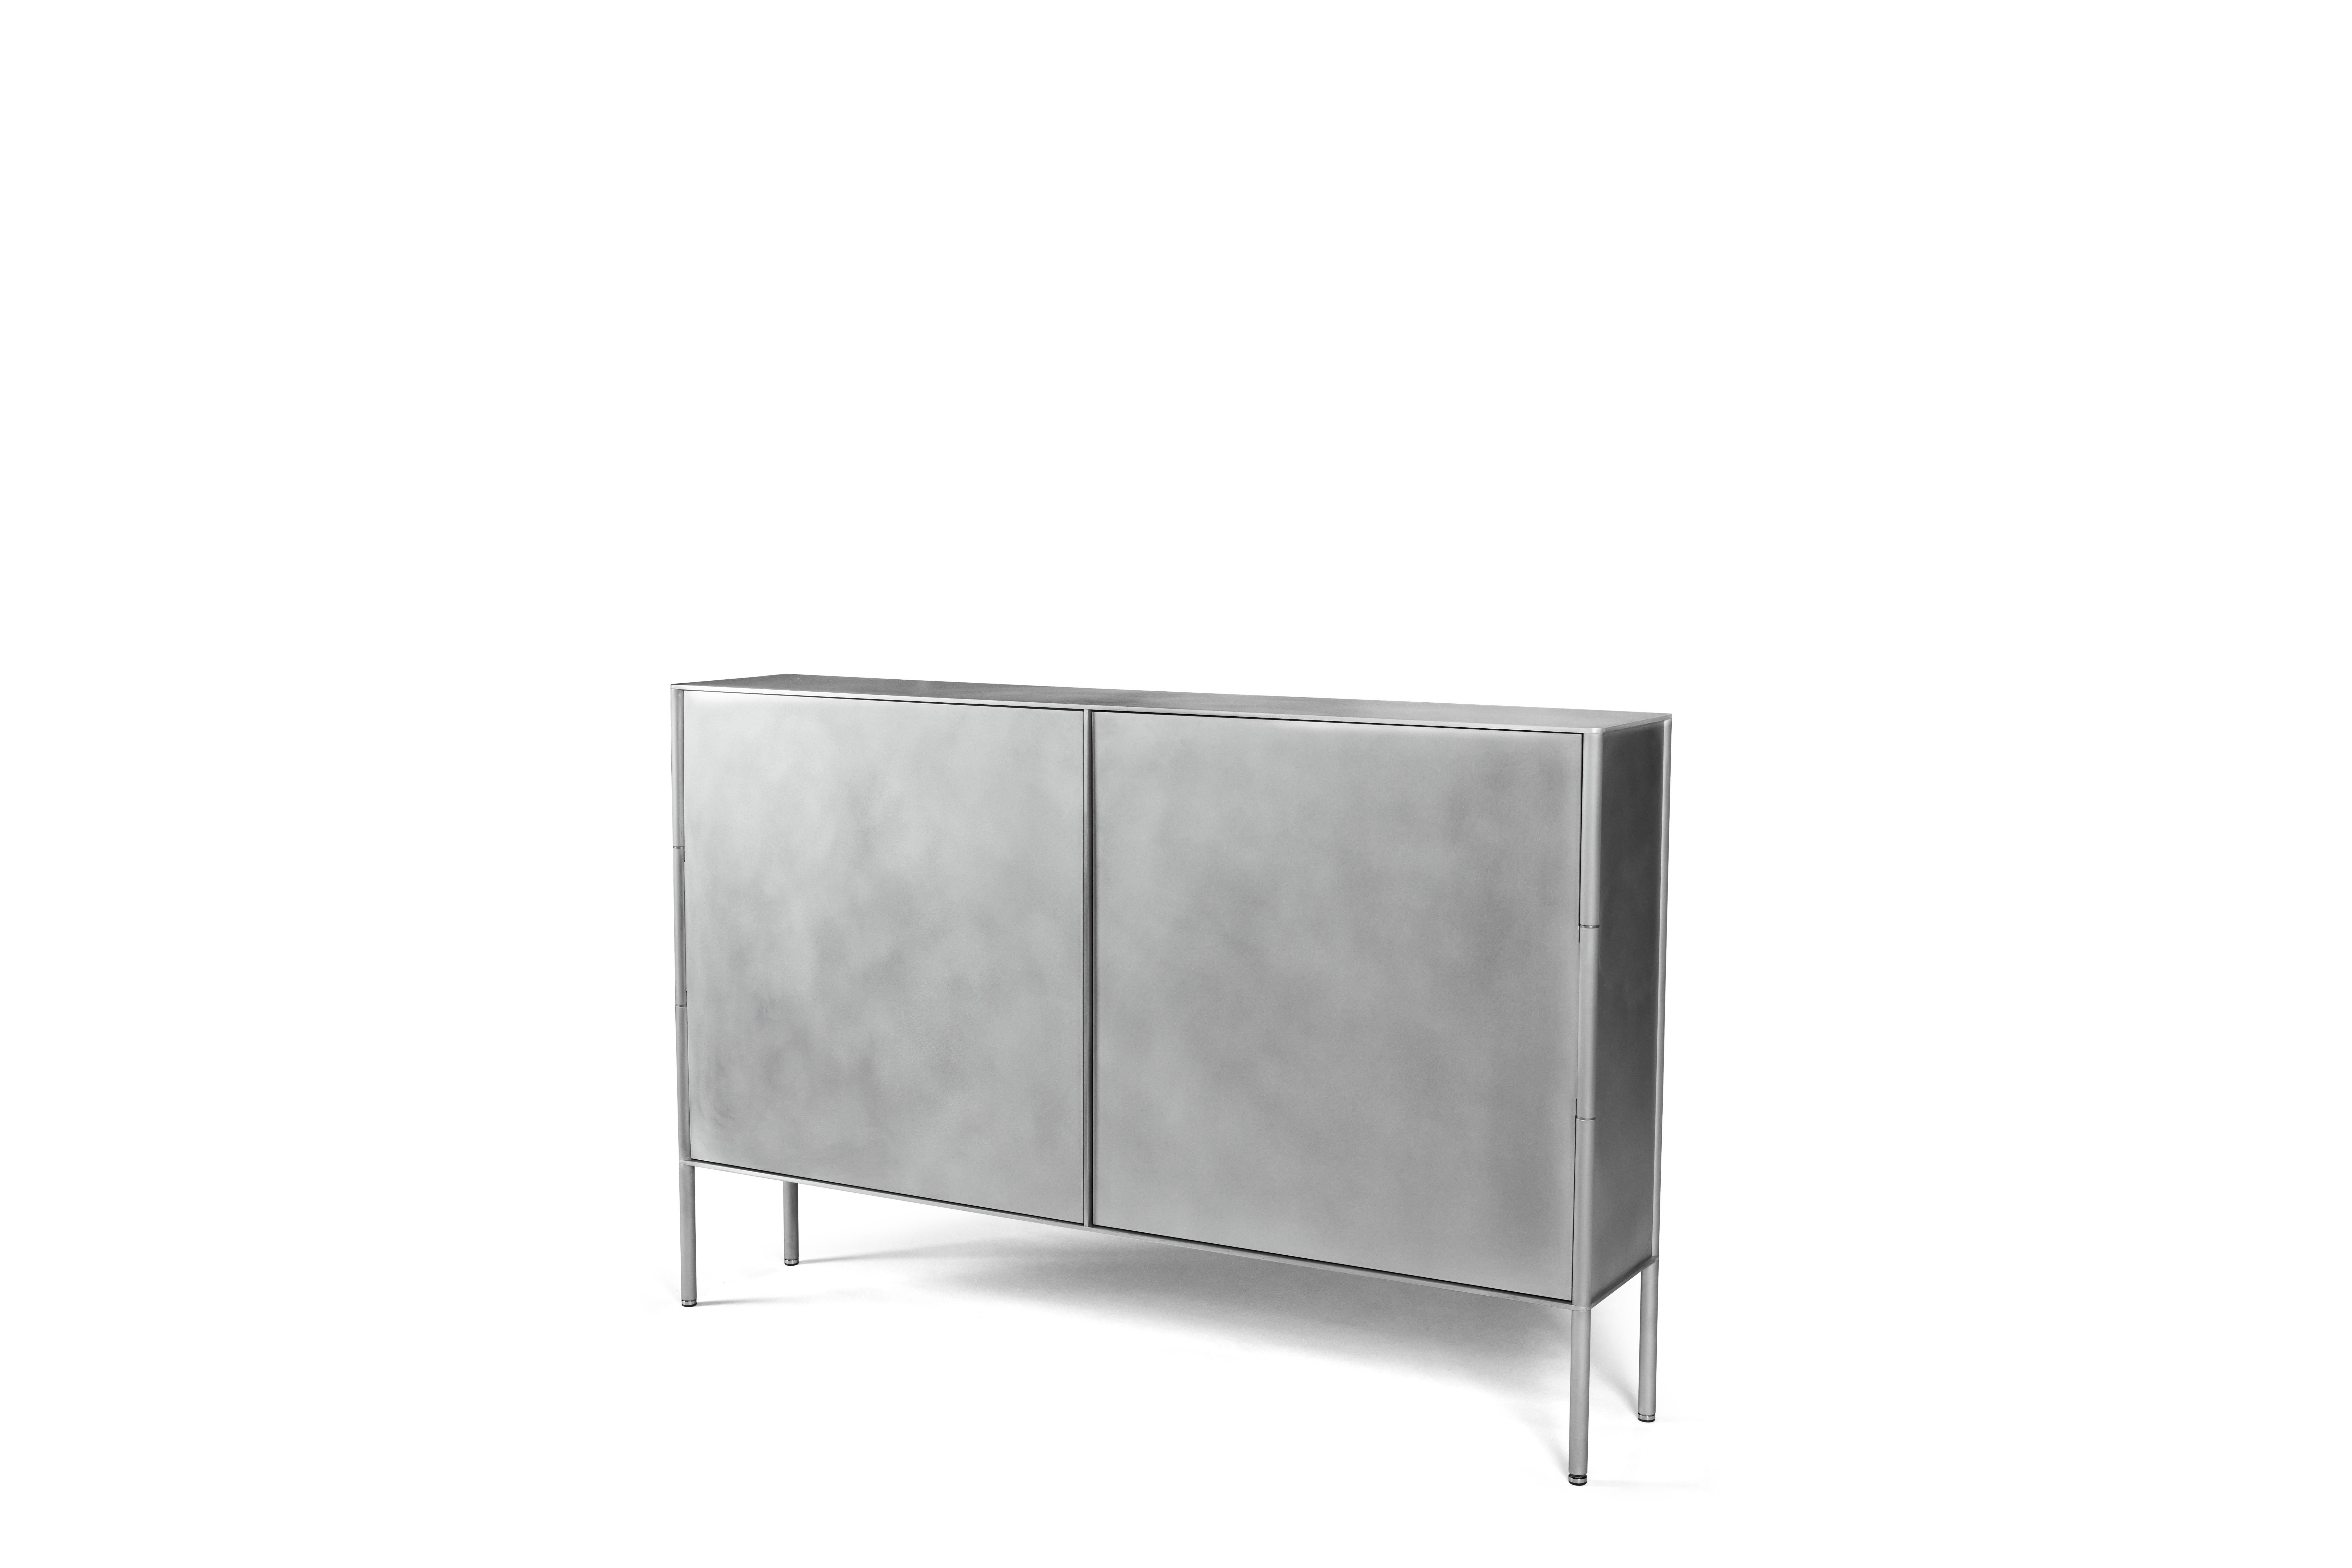 The SW cabinet by Jonathan Nesci is cut and machined aluminum with a waxed finish. The doors, back, and sides are milled into the legs. The doors are cut and are welded to machined custom hinges integrated into the legs. The doors open with a